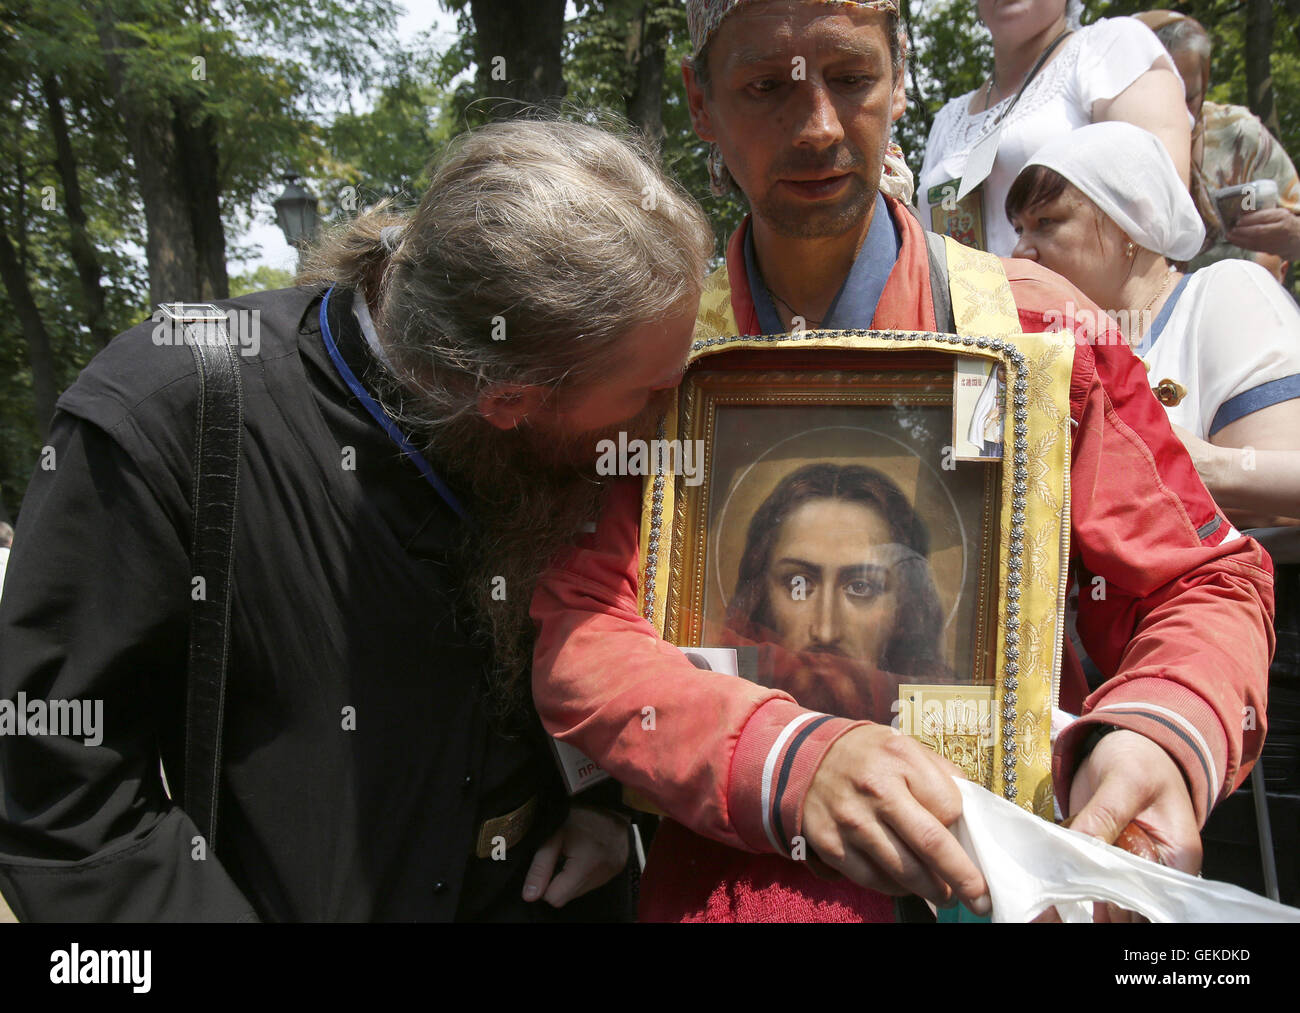 Kiev, Ukraine. 27th July, 2016. Orthodox priest of Moscow Patriarchy kisses the icon at a prayer ceremony at the St. 27th July, 2016. Vladimir's Hill, marking the 1028th anniversary of the Baptism of Kievan Rus in Kiev on July 27, 2016. Credit:  Anatolii Stepanov/ZUMA Wire/Alamy Live News Stock Photo